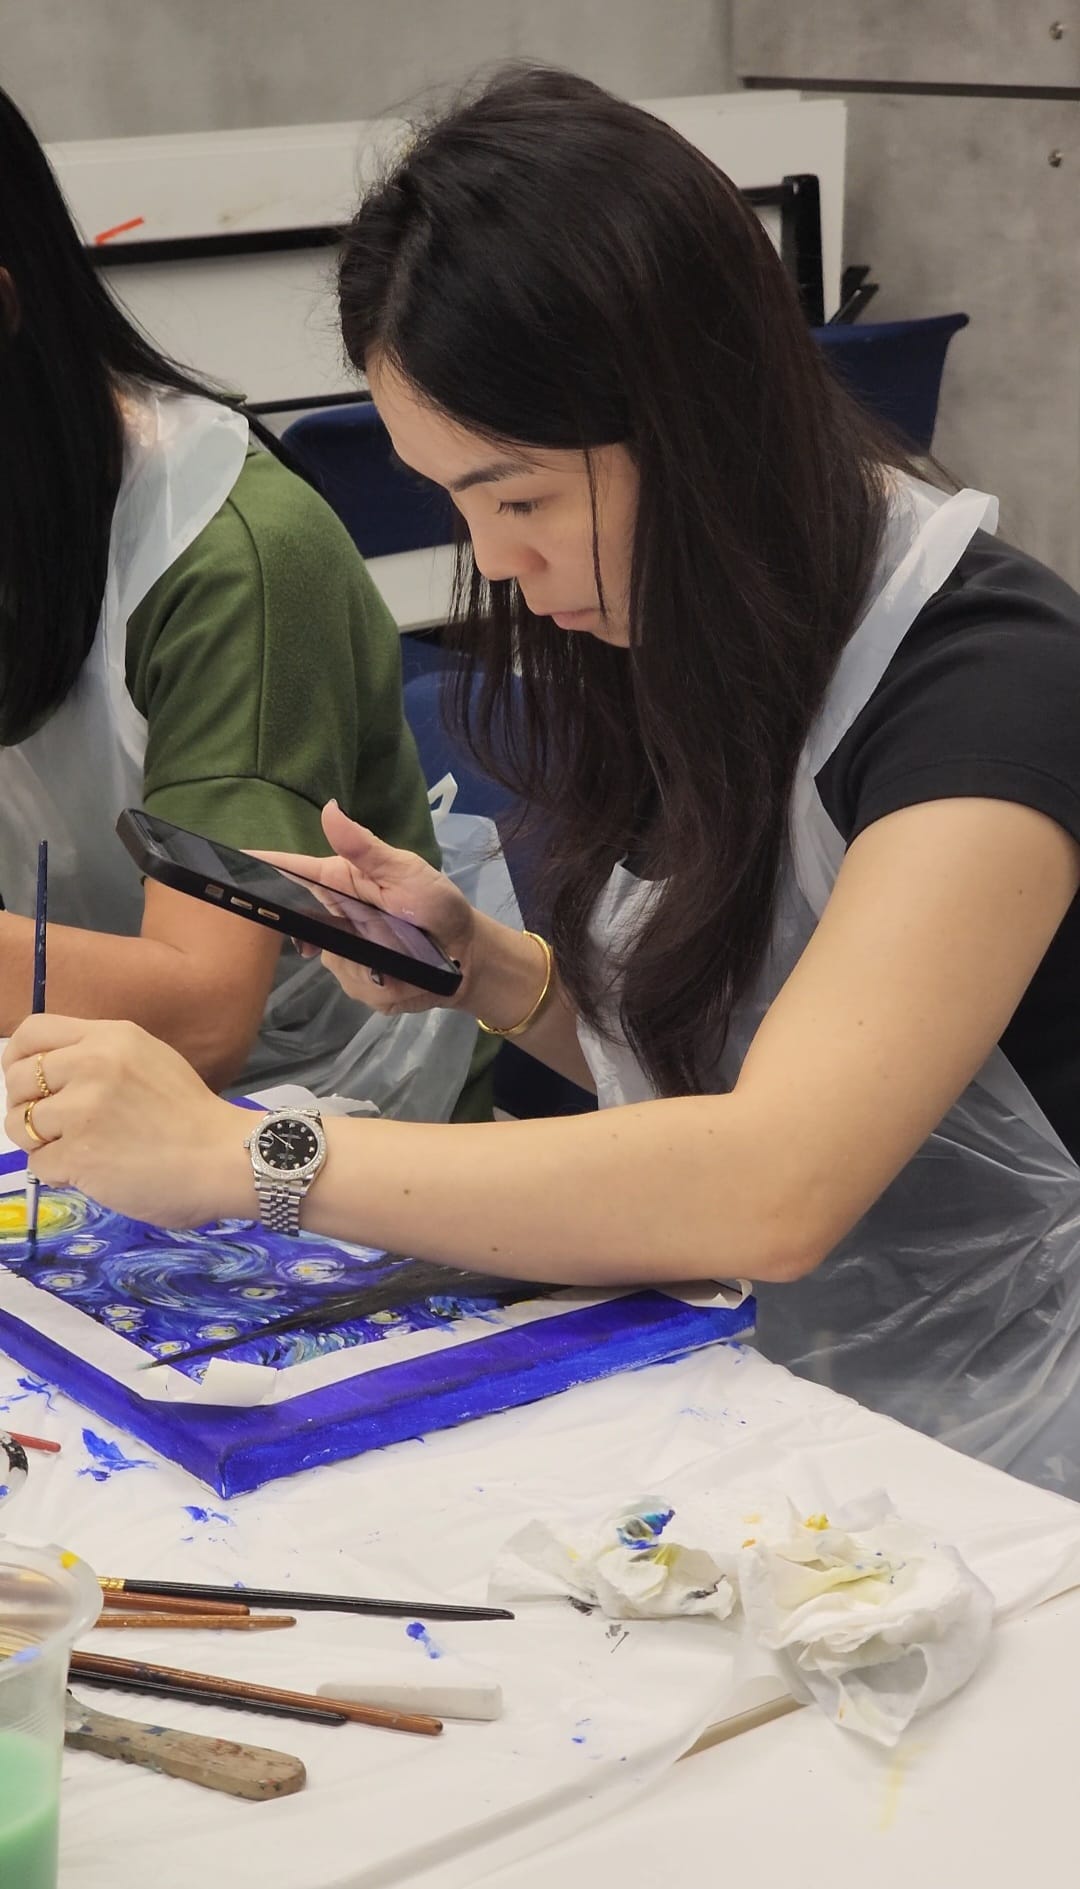 Hustle Student painting at a Starry Starry Night themed art jam